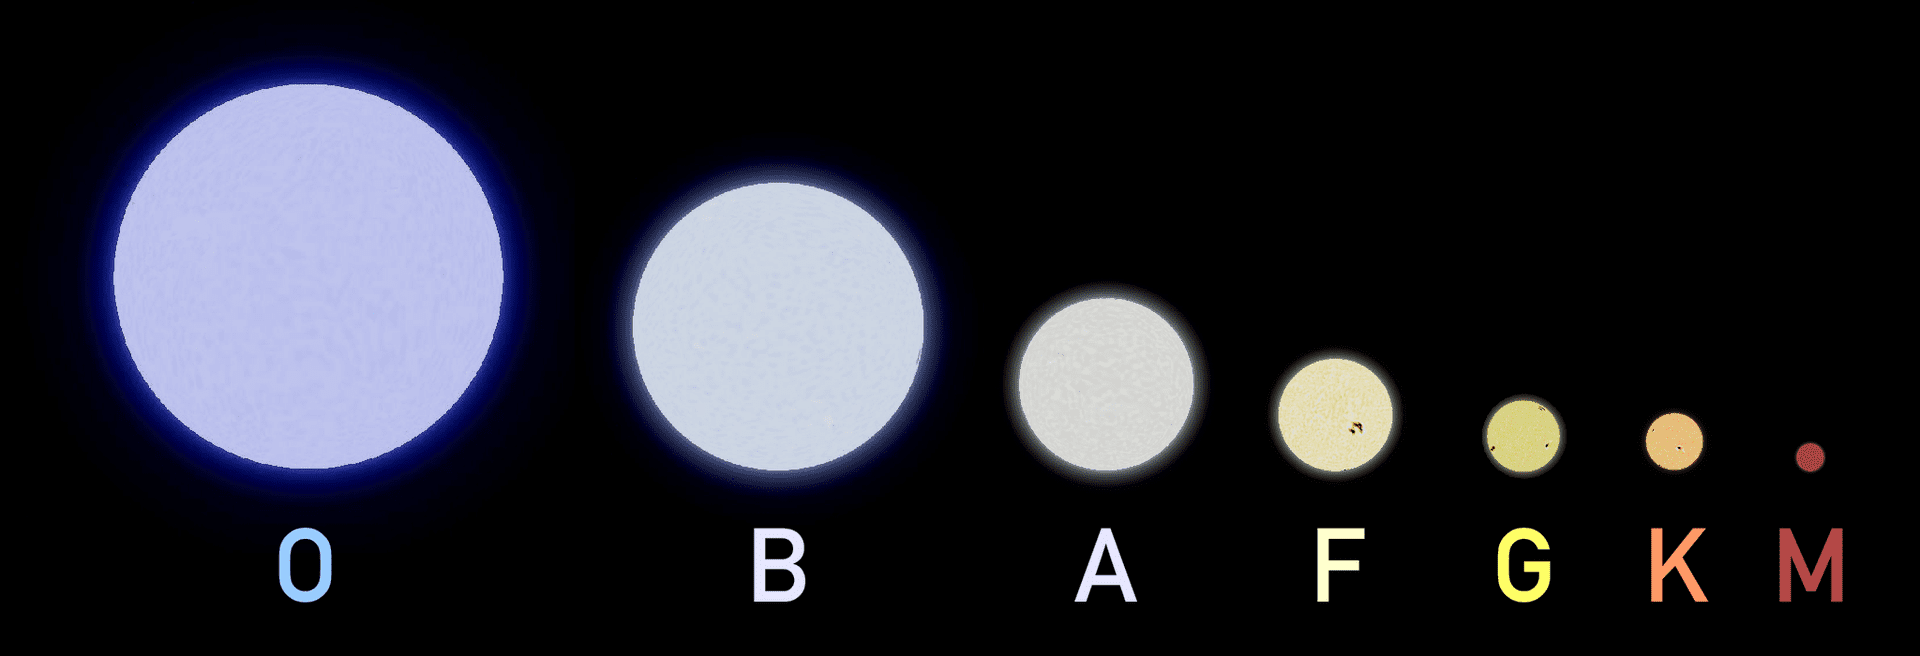 Understanding Stars Types Formation And Characteristics